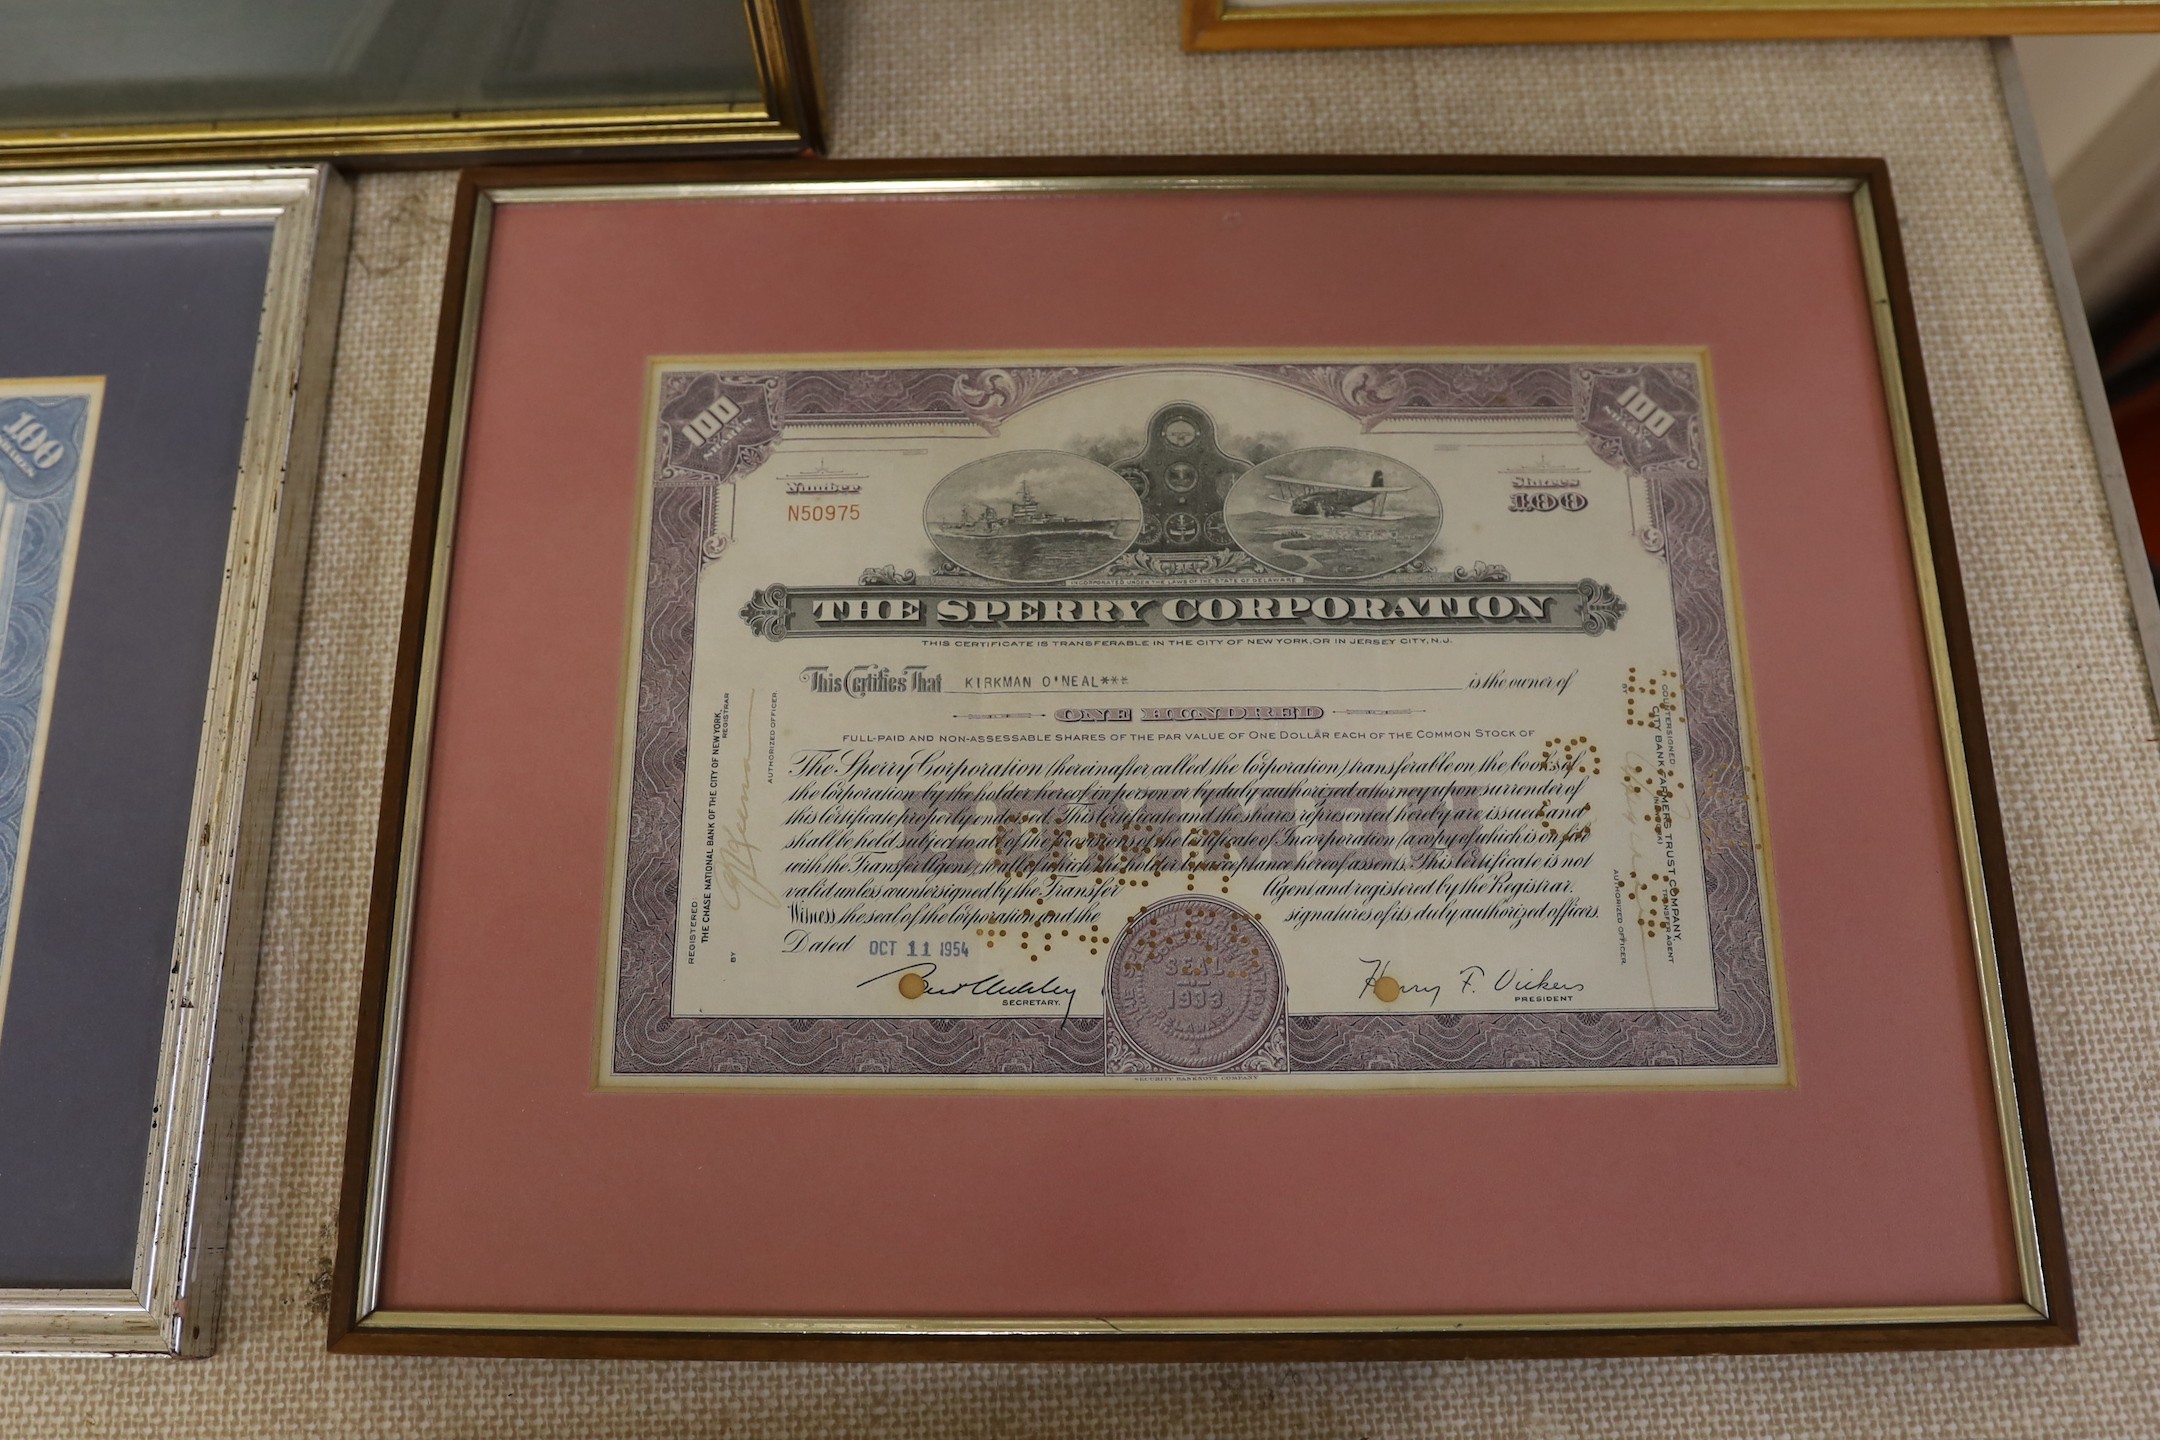 Four framed share certificates and two religious engravings